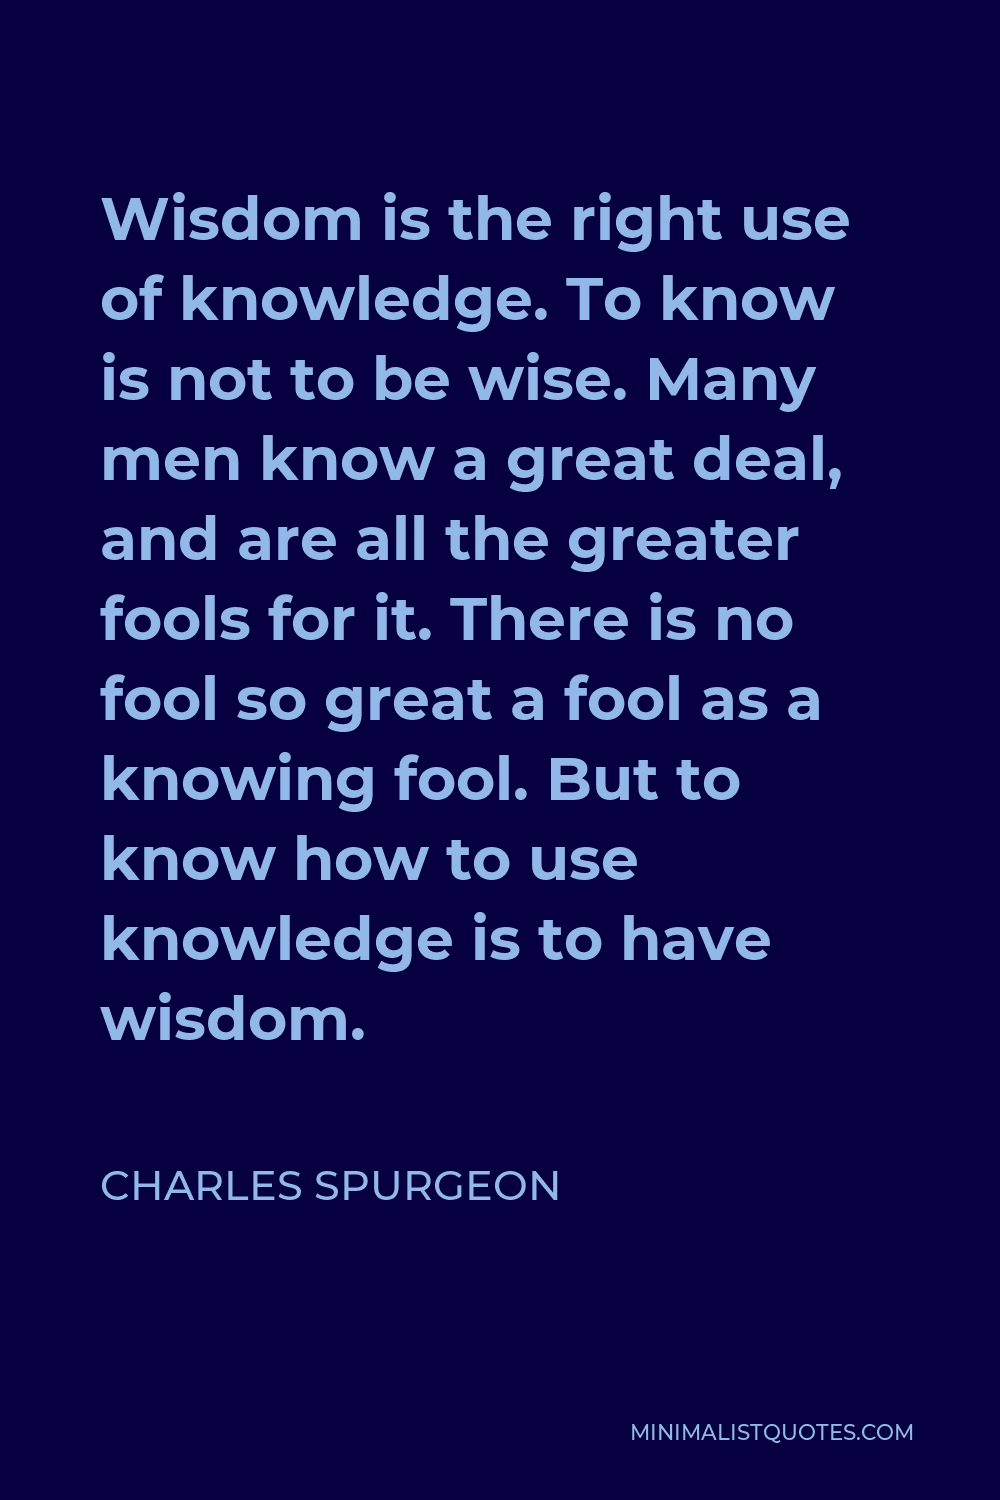 Charles Spurgeon Quote - Wisdom is the right use of knowledge. To know is not to be wise. Many men know a great deal, and are all the greater fools for it. There is no fool so great a fool as a knowing fool. But to know how to use knowledge is to have wisdom.